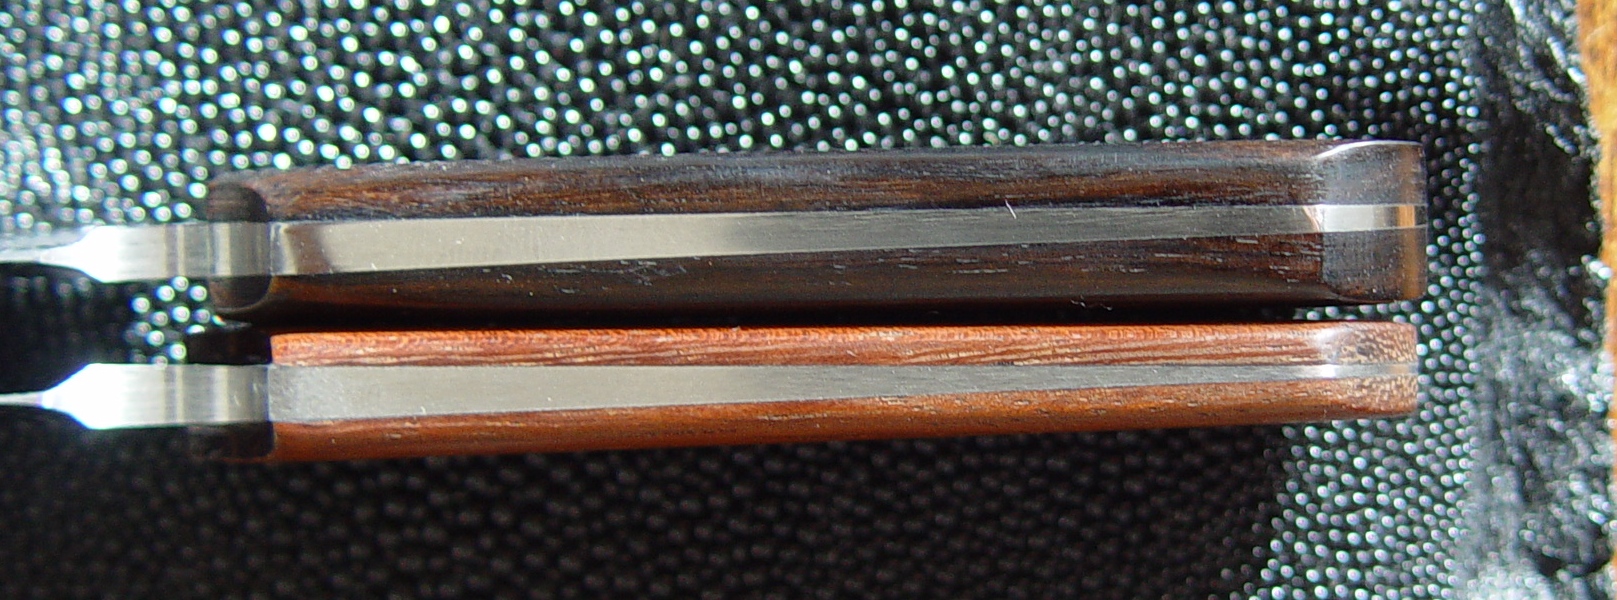 Showing detail of the tapered tang